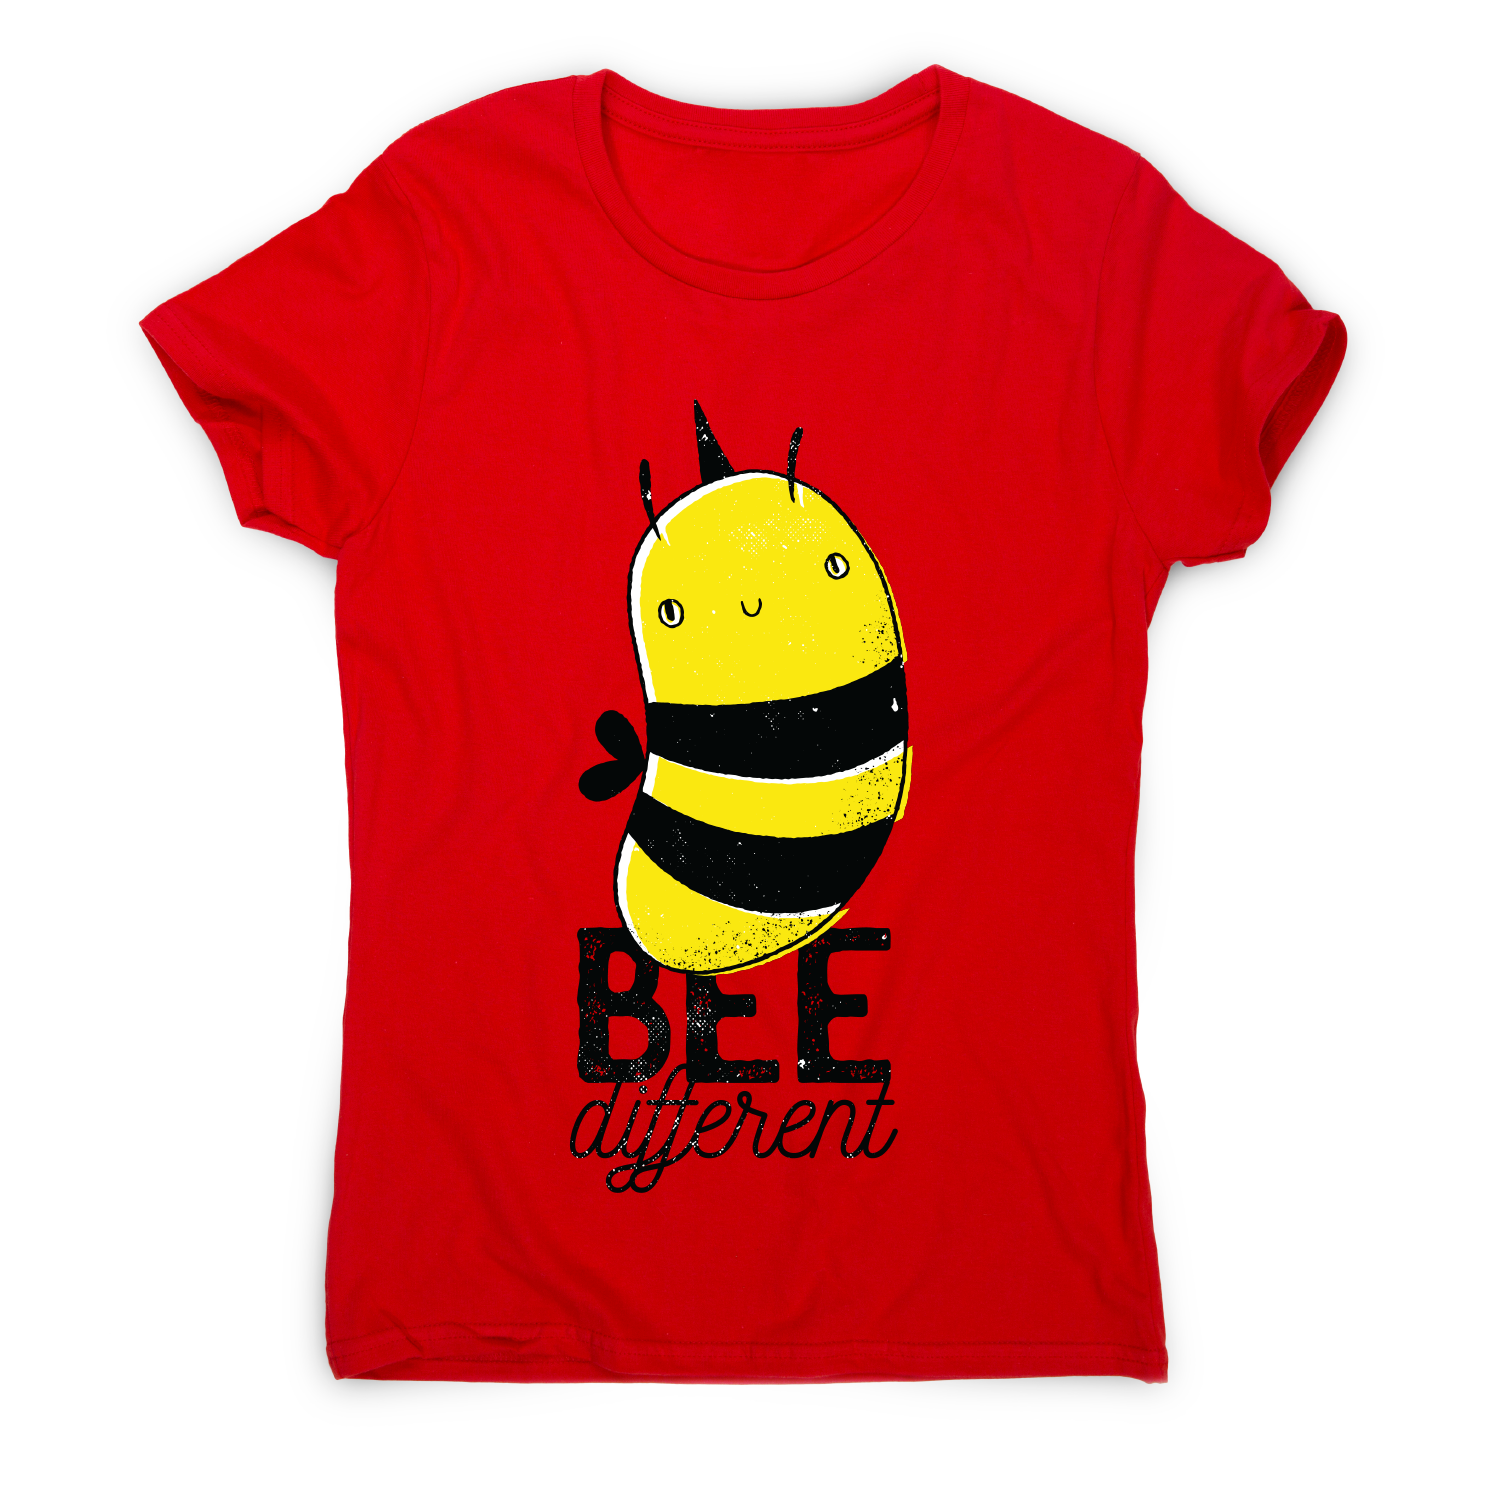 Bee different quote awesome design t-shirt women's | Graphic Gear